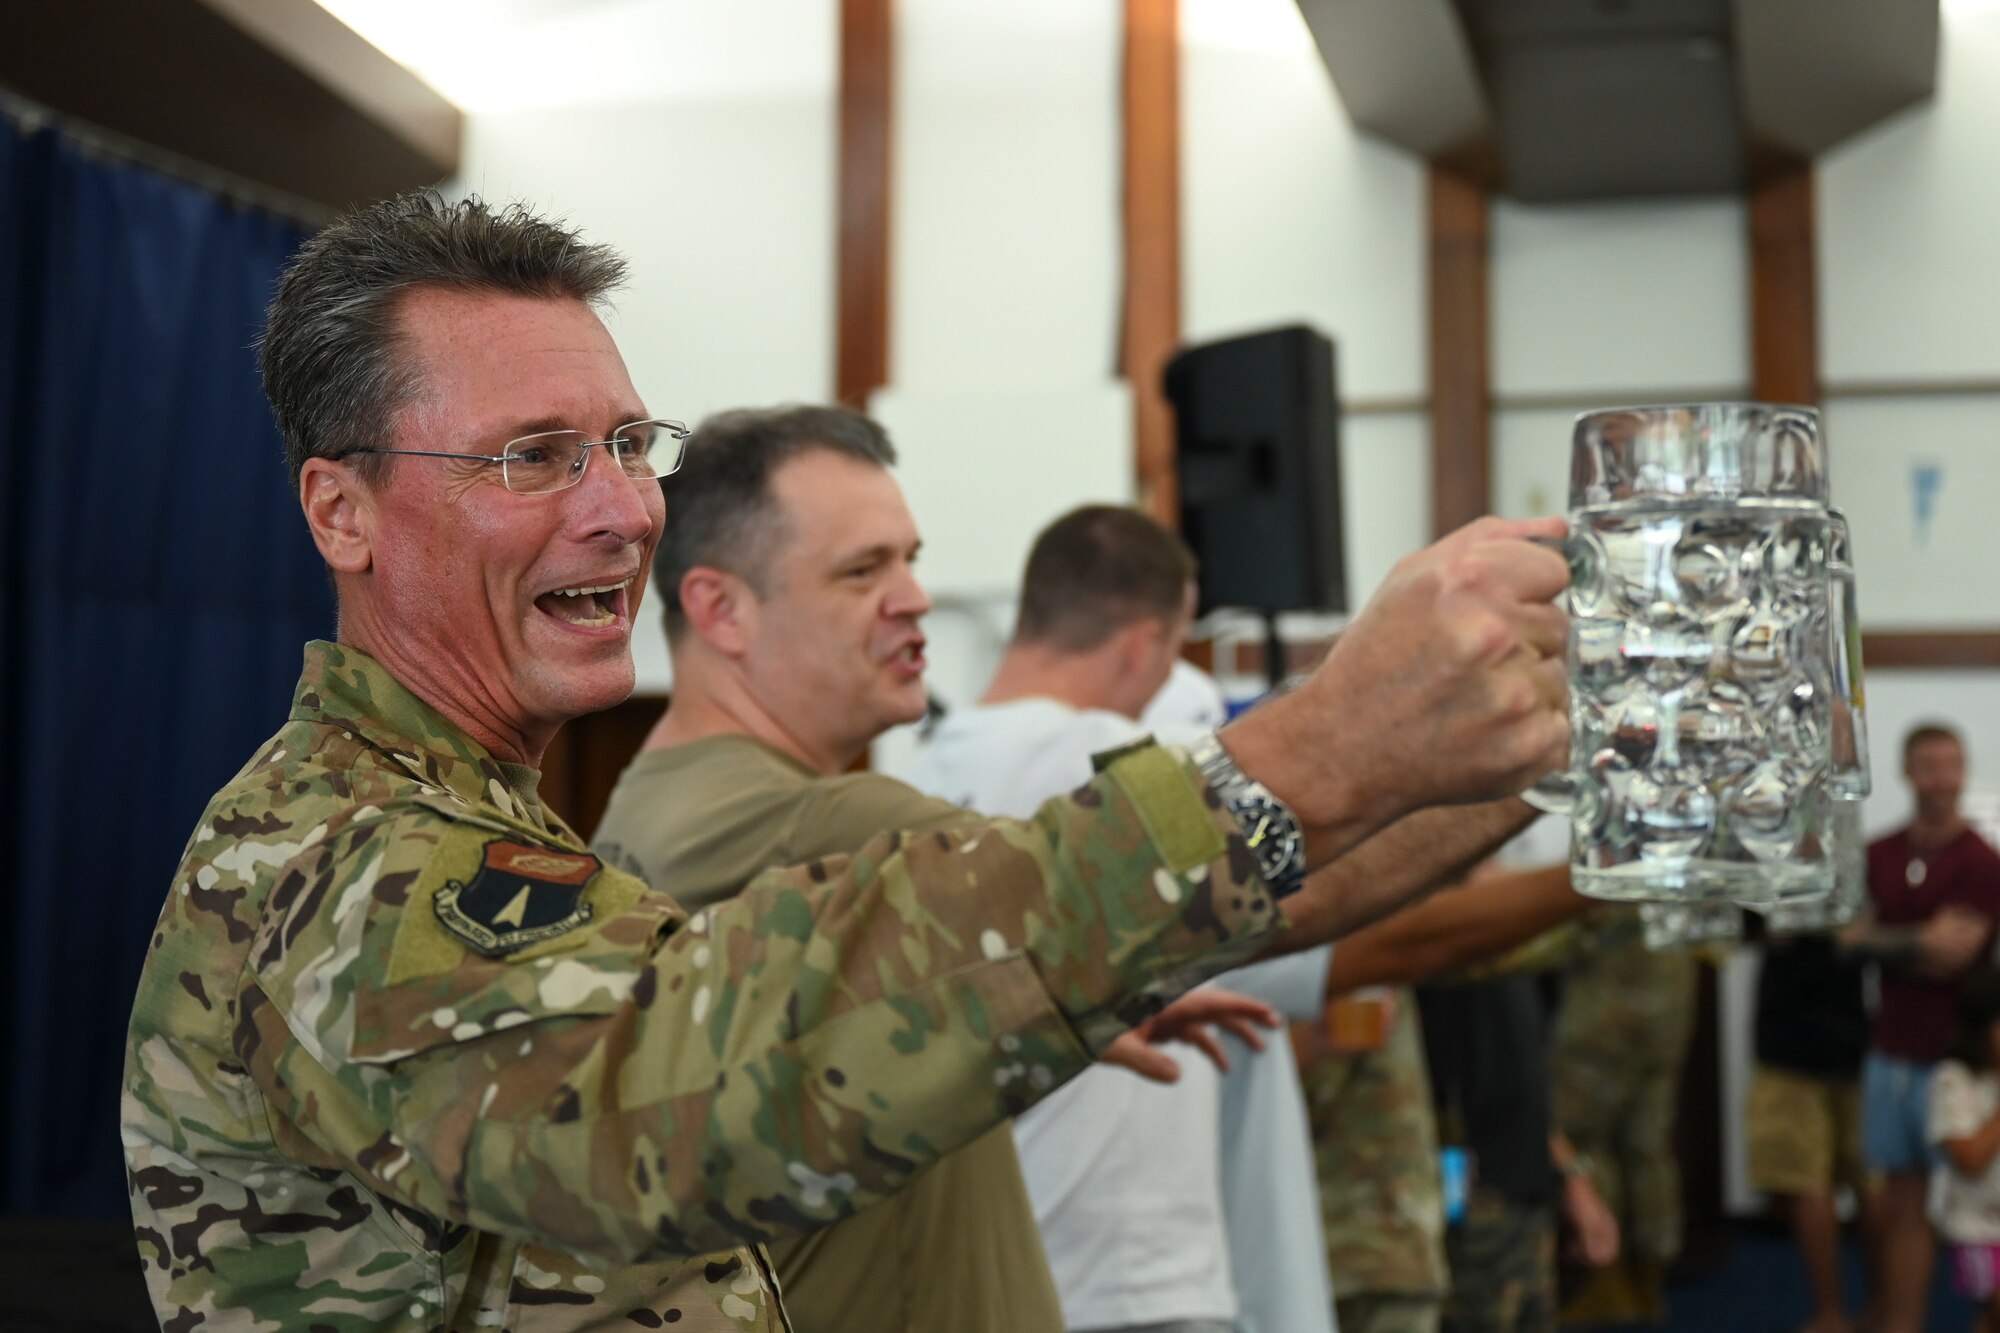 Brig. Gen. Thomas Palenske, 36th Wing commander, participates in a competition during the 36th Wing First Friday Oktoberfest event at Andersen Air Force Base, Guam, Oct. 6, 2023.